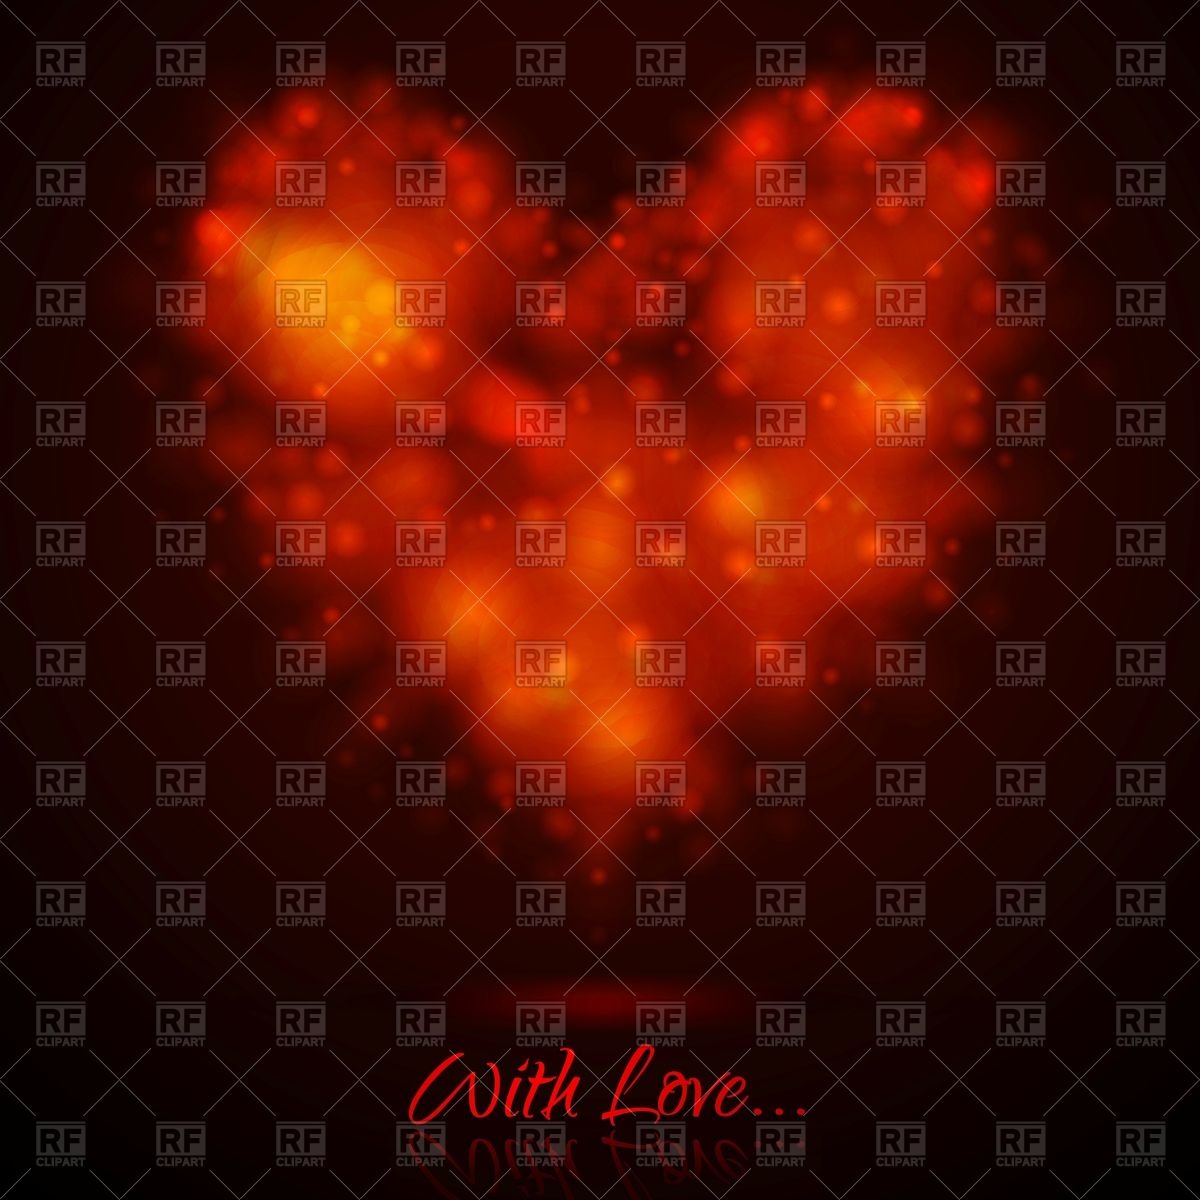 Heart Made Of Shiny Blurred Lights   Abstract Glowing 54359 Download